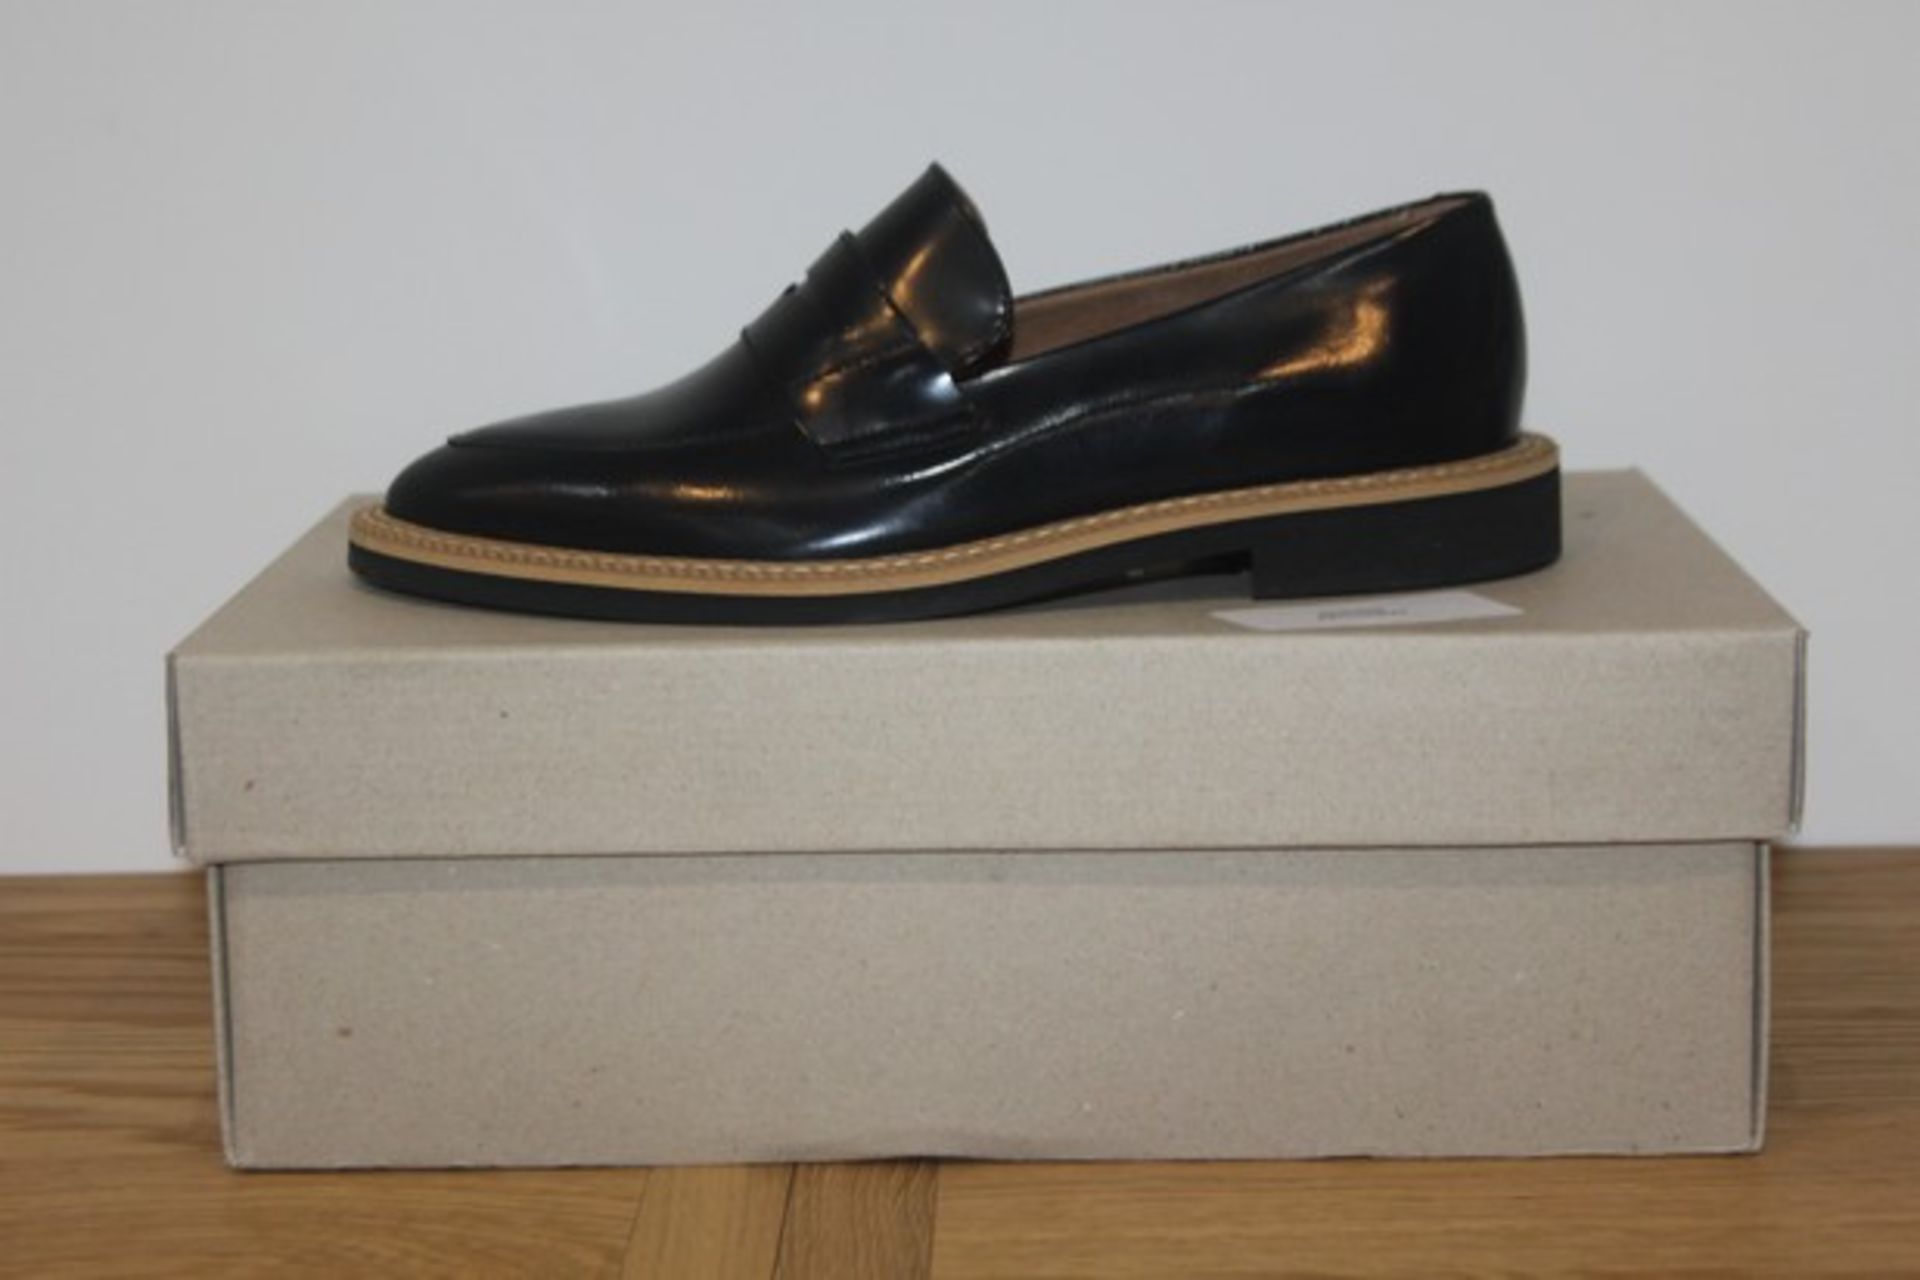 BOXED BRAND NEW SELECTED SHOES SIZE 6 RRP £90 (DSSALVAGE)